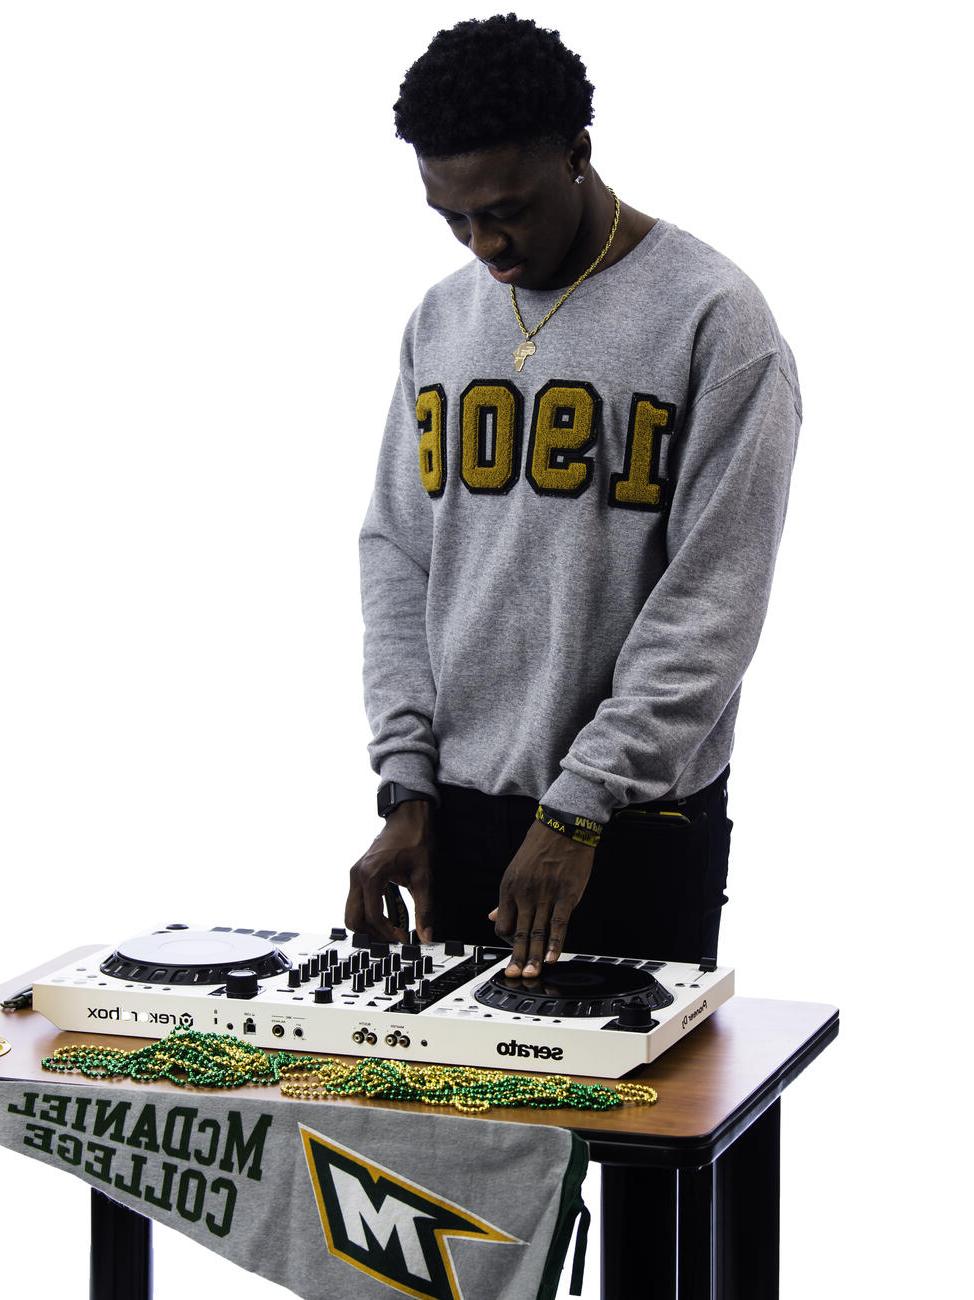 Kekuta呸 poses with a DJ board on a table.